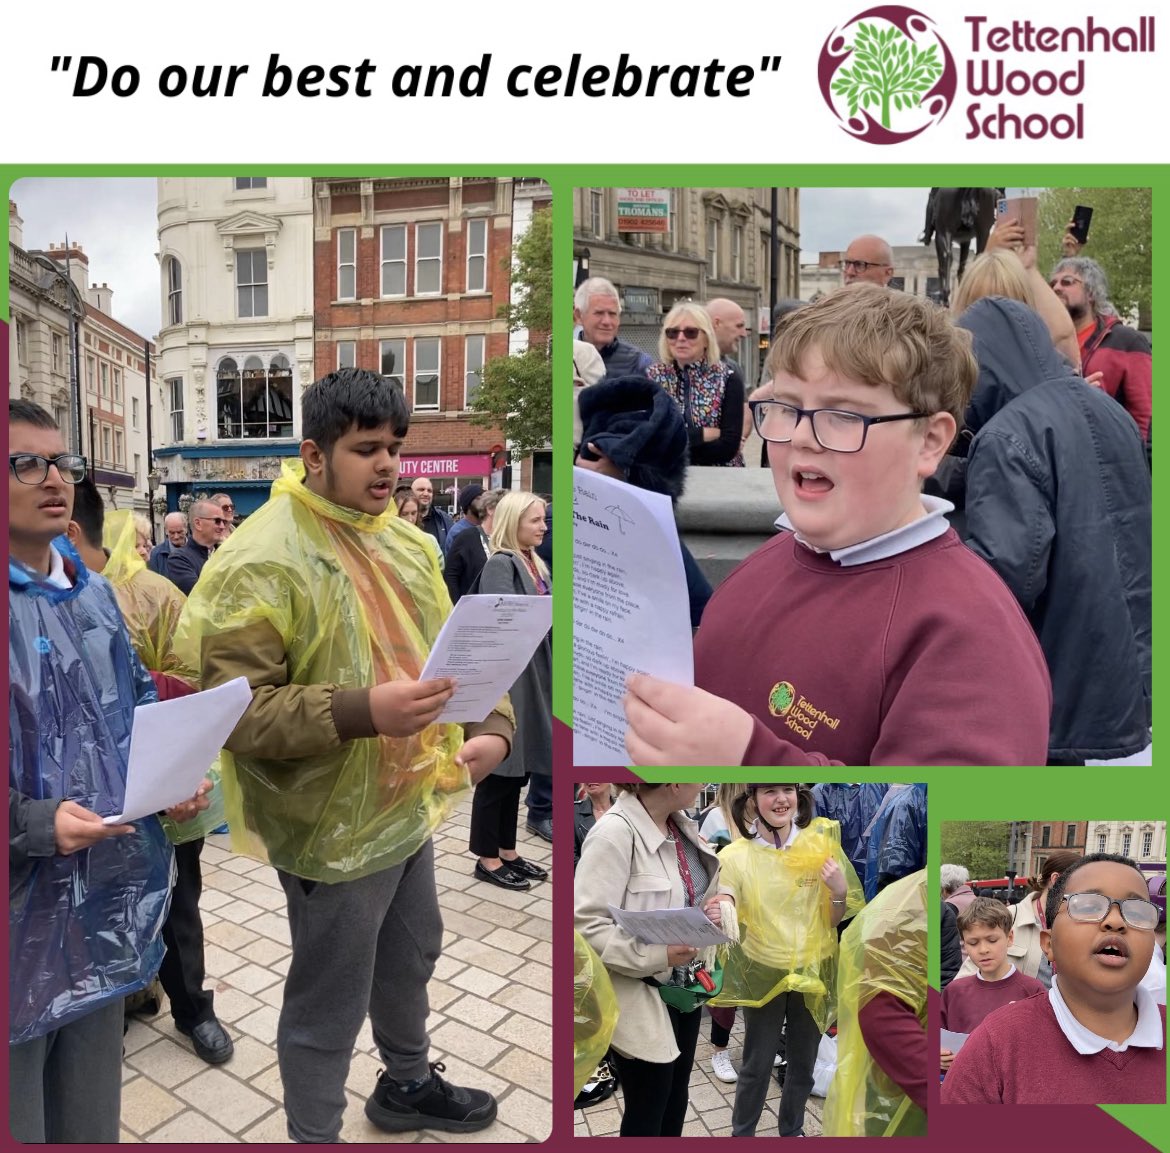 Tettenhall Wood School were proud to take part in the Singing in the Rain event hosted by Wolverhampton Music Service in Queen’s Square. What a fantastic atmosphere! 

#autism #Autistic #Singingintherain